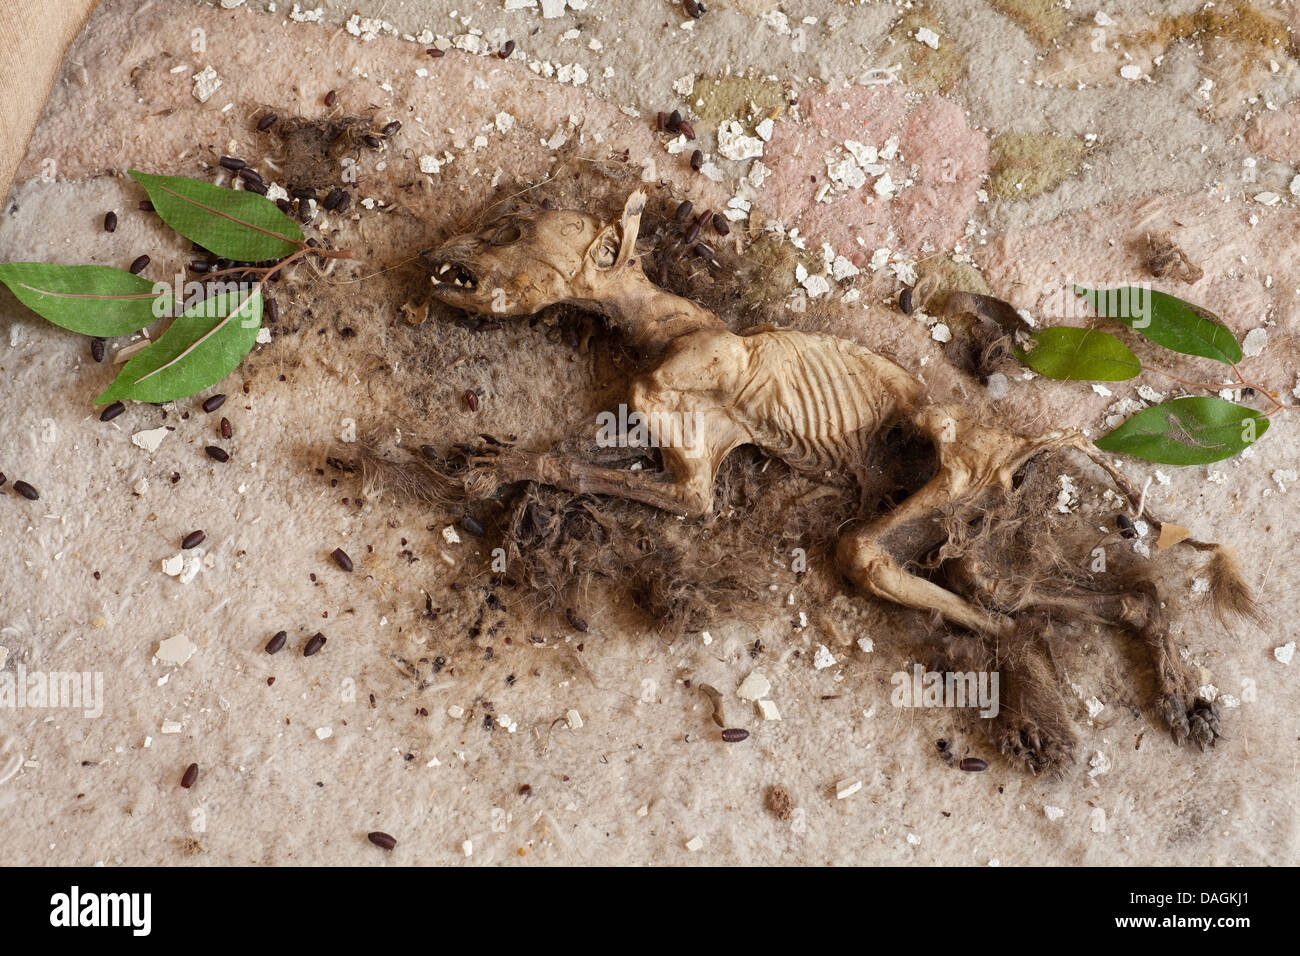 Dead cat laying on a carpet with leaves around the body. Ontario, Canada. Stock Photo